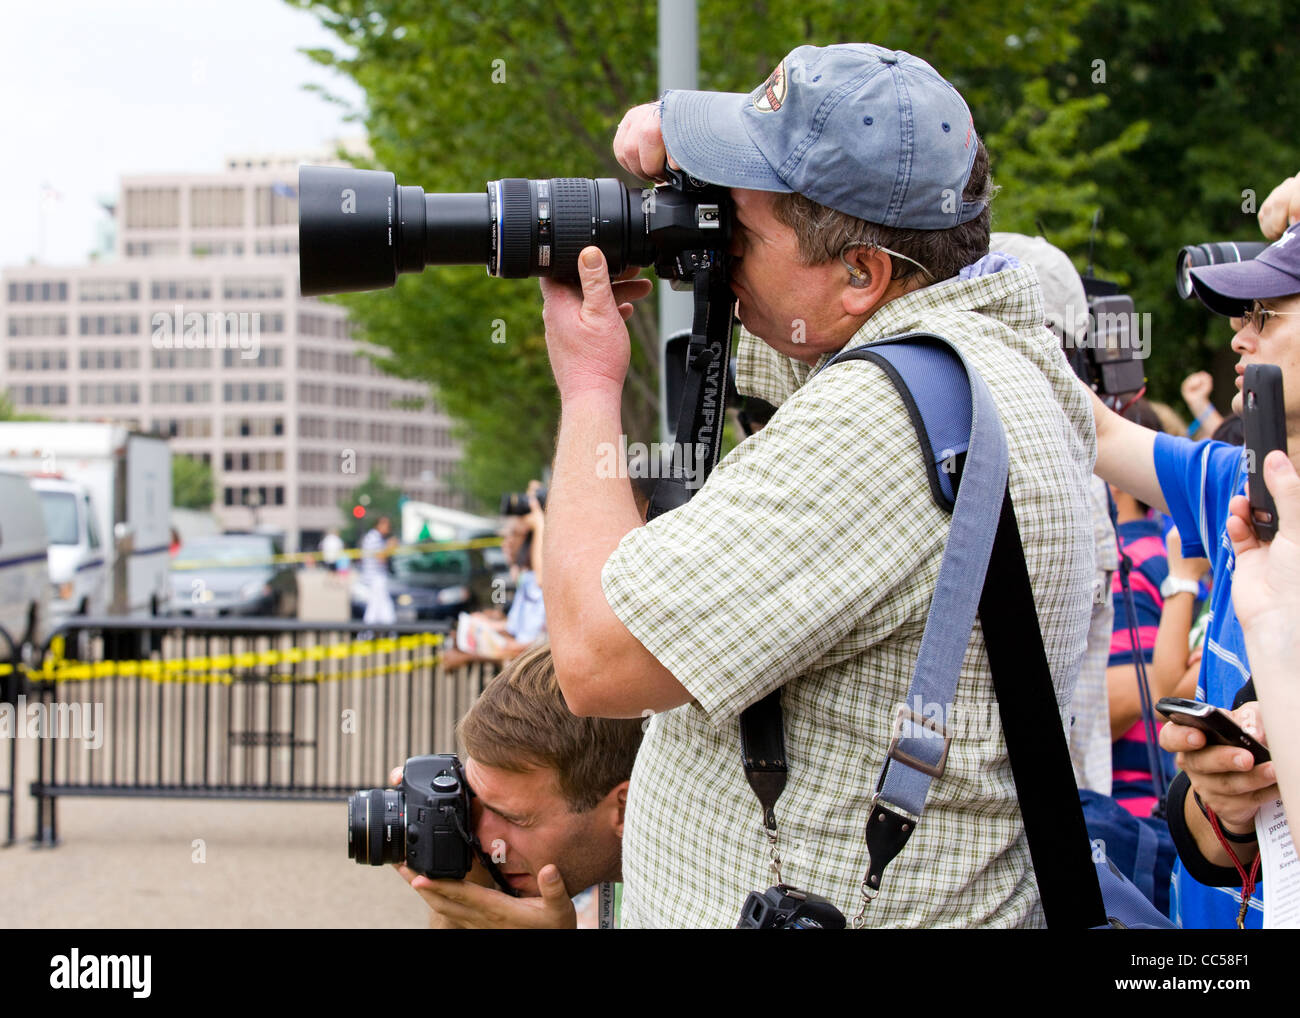 Photographers lined up to take pictures - USA Stock Photo